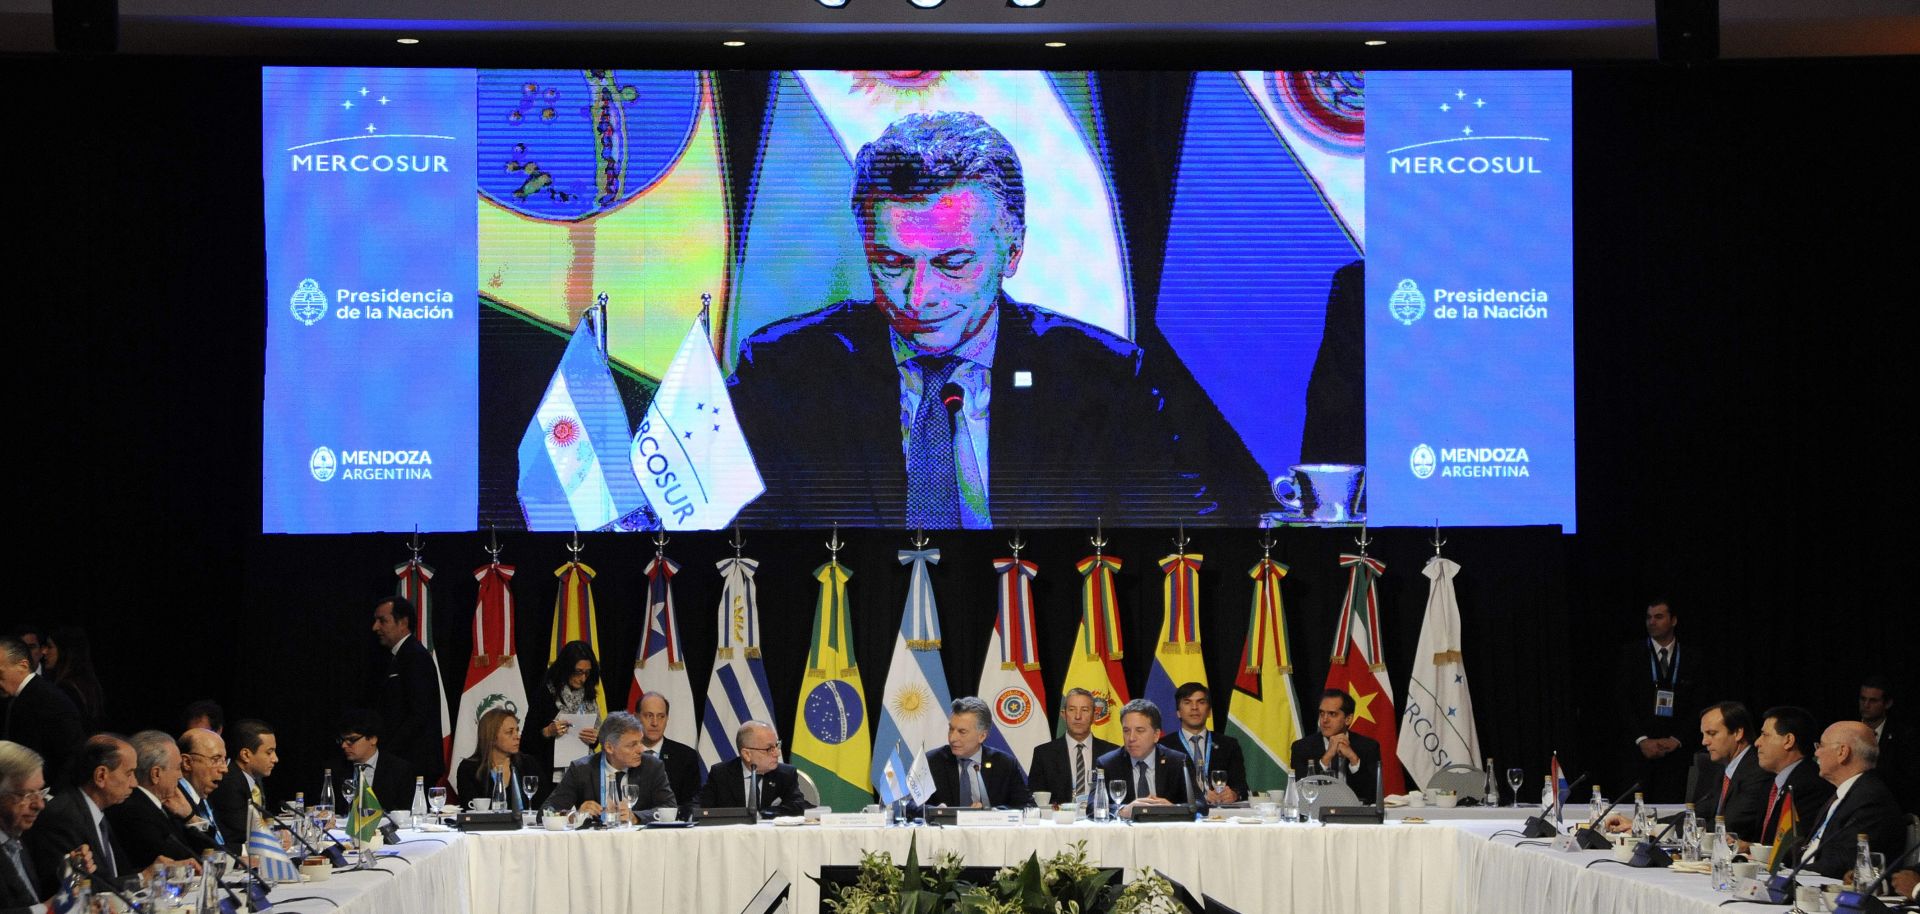 A shift in attitude by Mercosur's two biggest economies, Argentina (represented by President Mauricio Macri, speaking) and Brazil